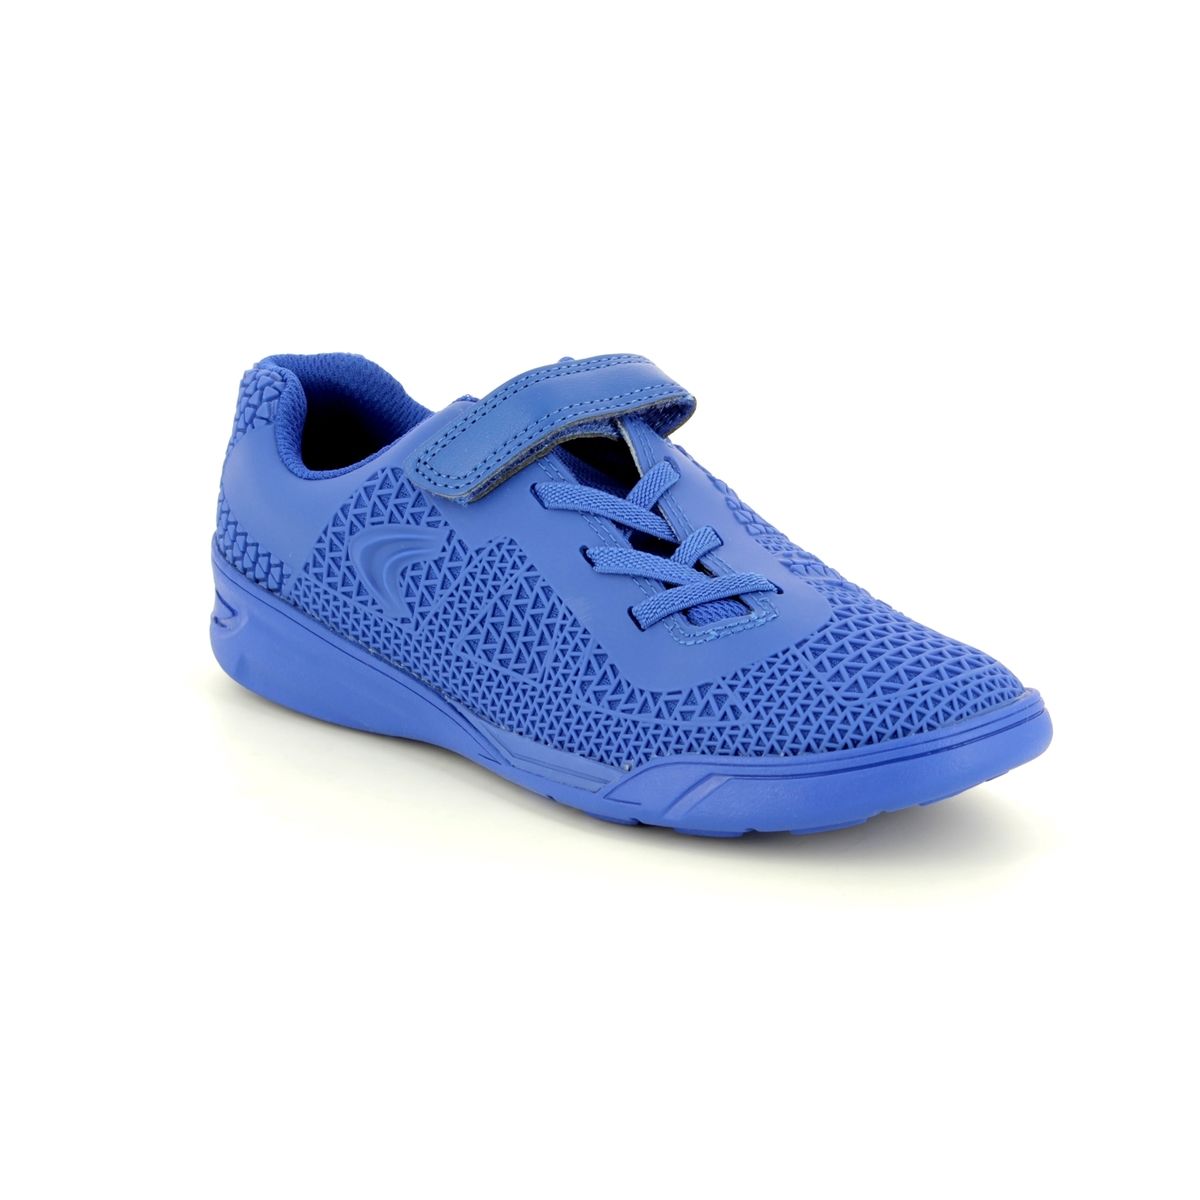 clarks trainers for boys